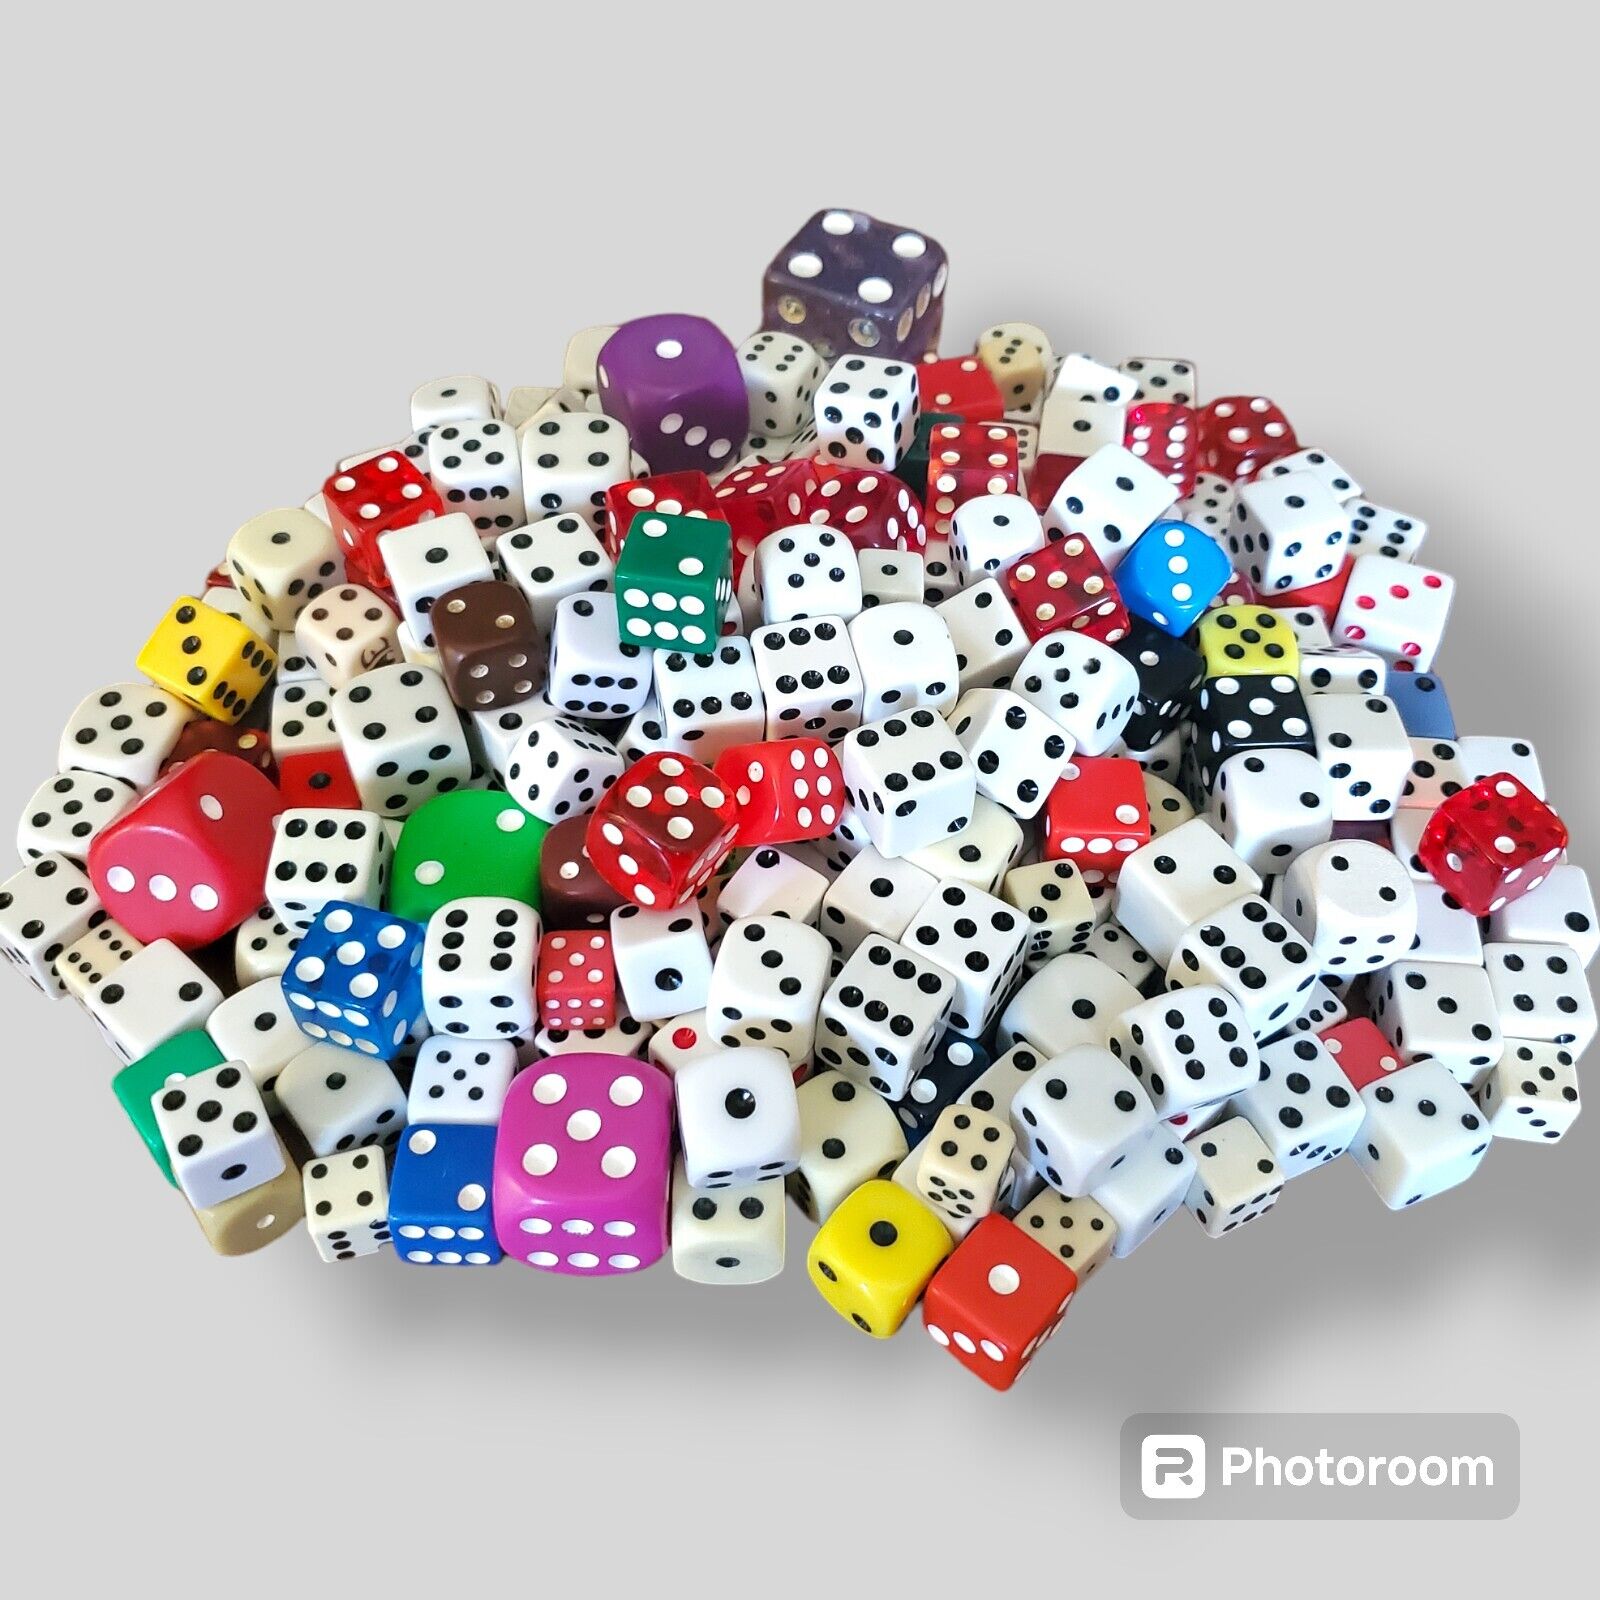 Large Lot of 270 Dice - Various Colors and Sizes - 3 Pounds